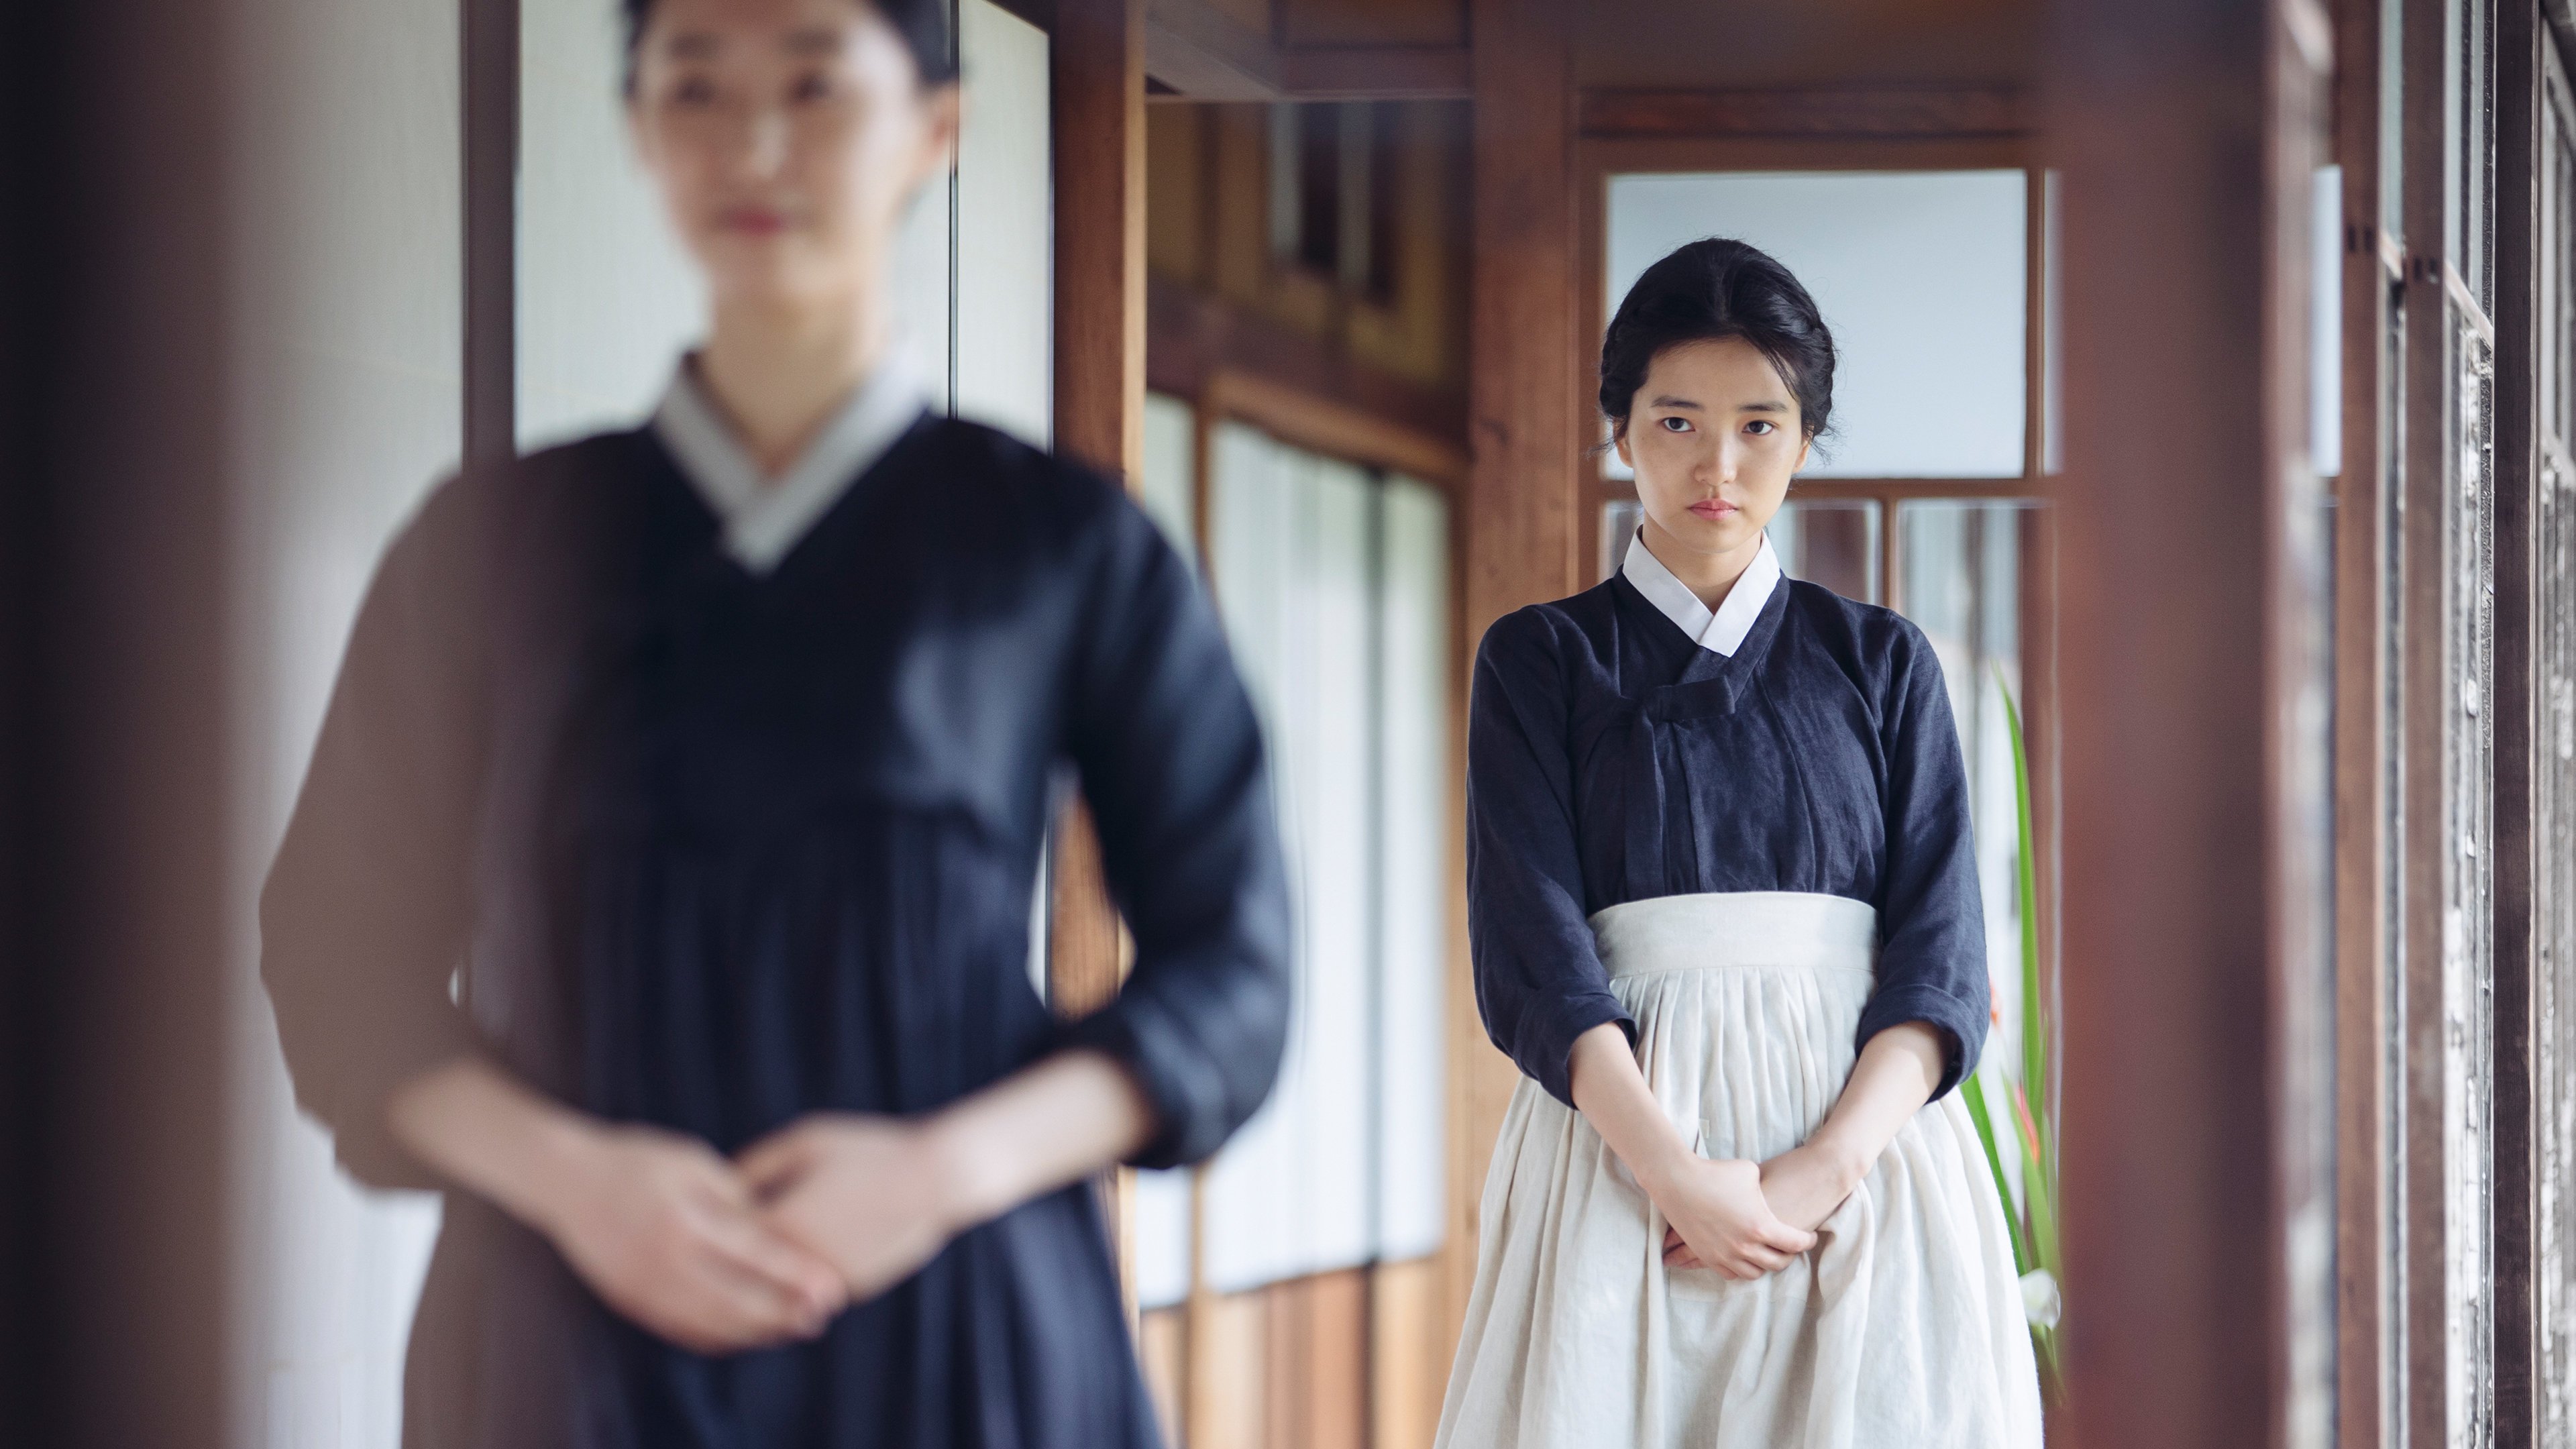 chris kelf recommends the handmaiden eng subtitles pic